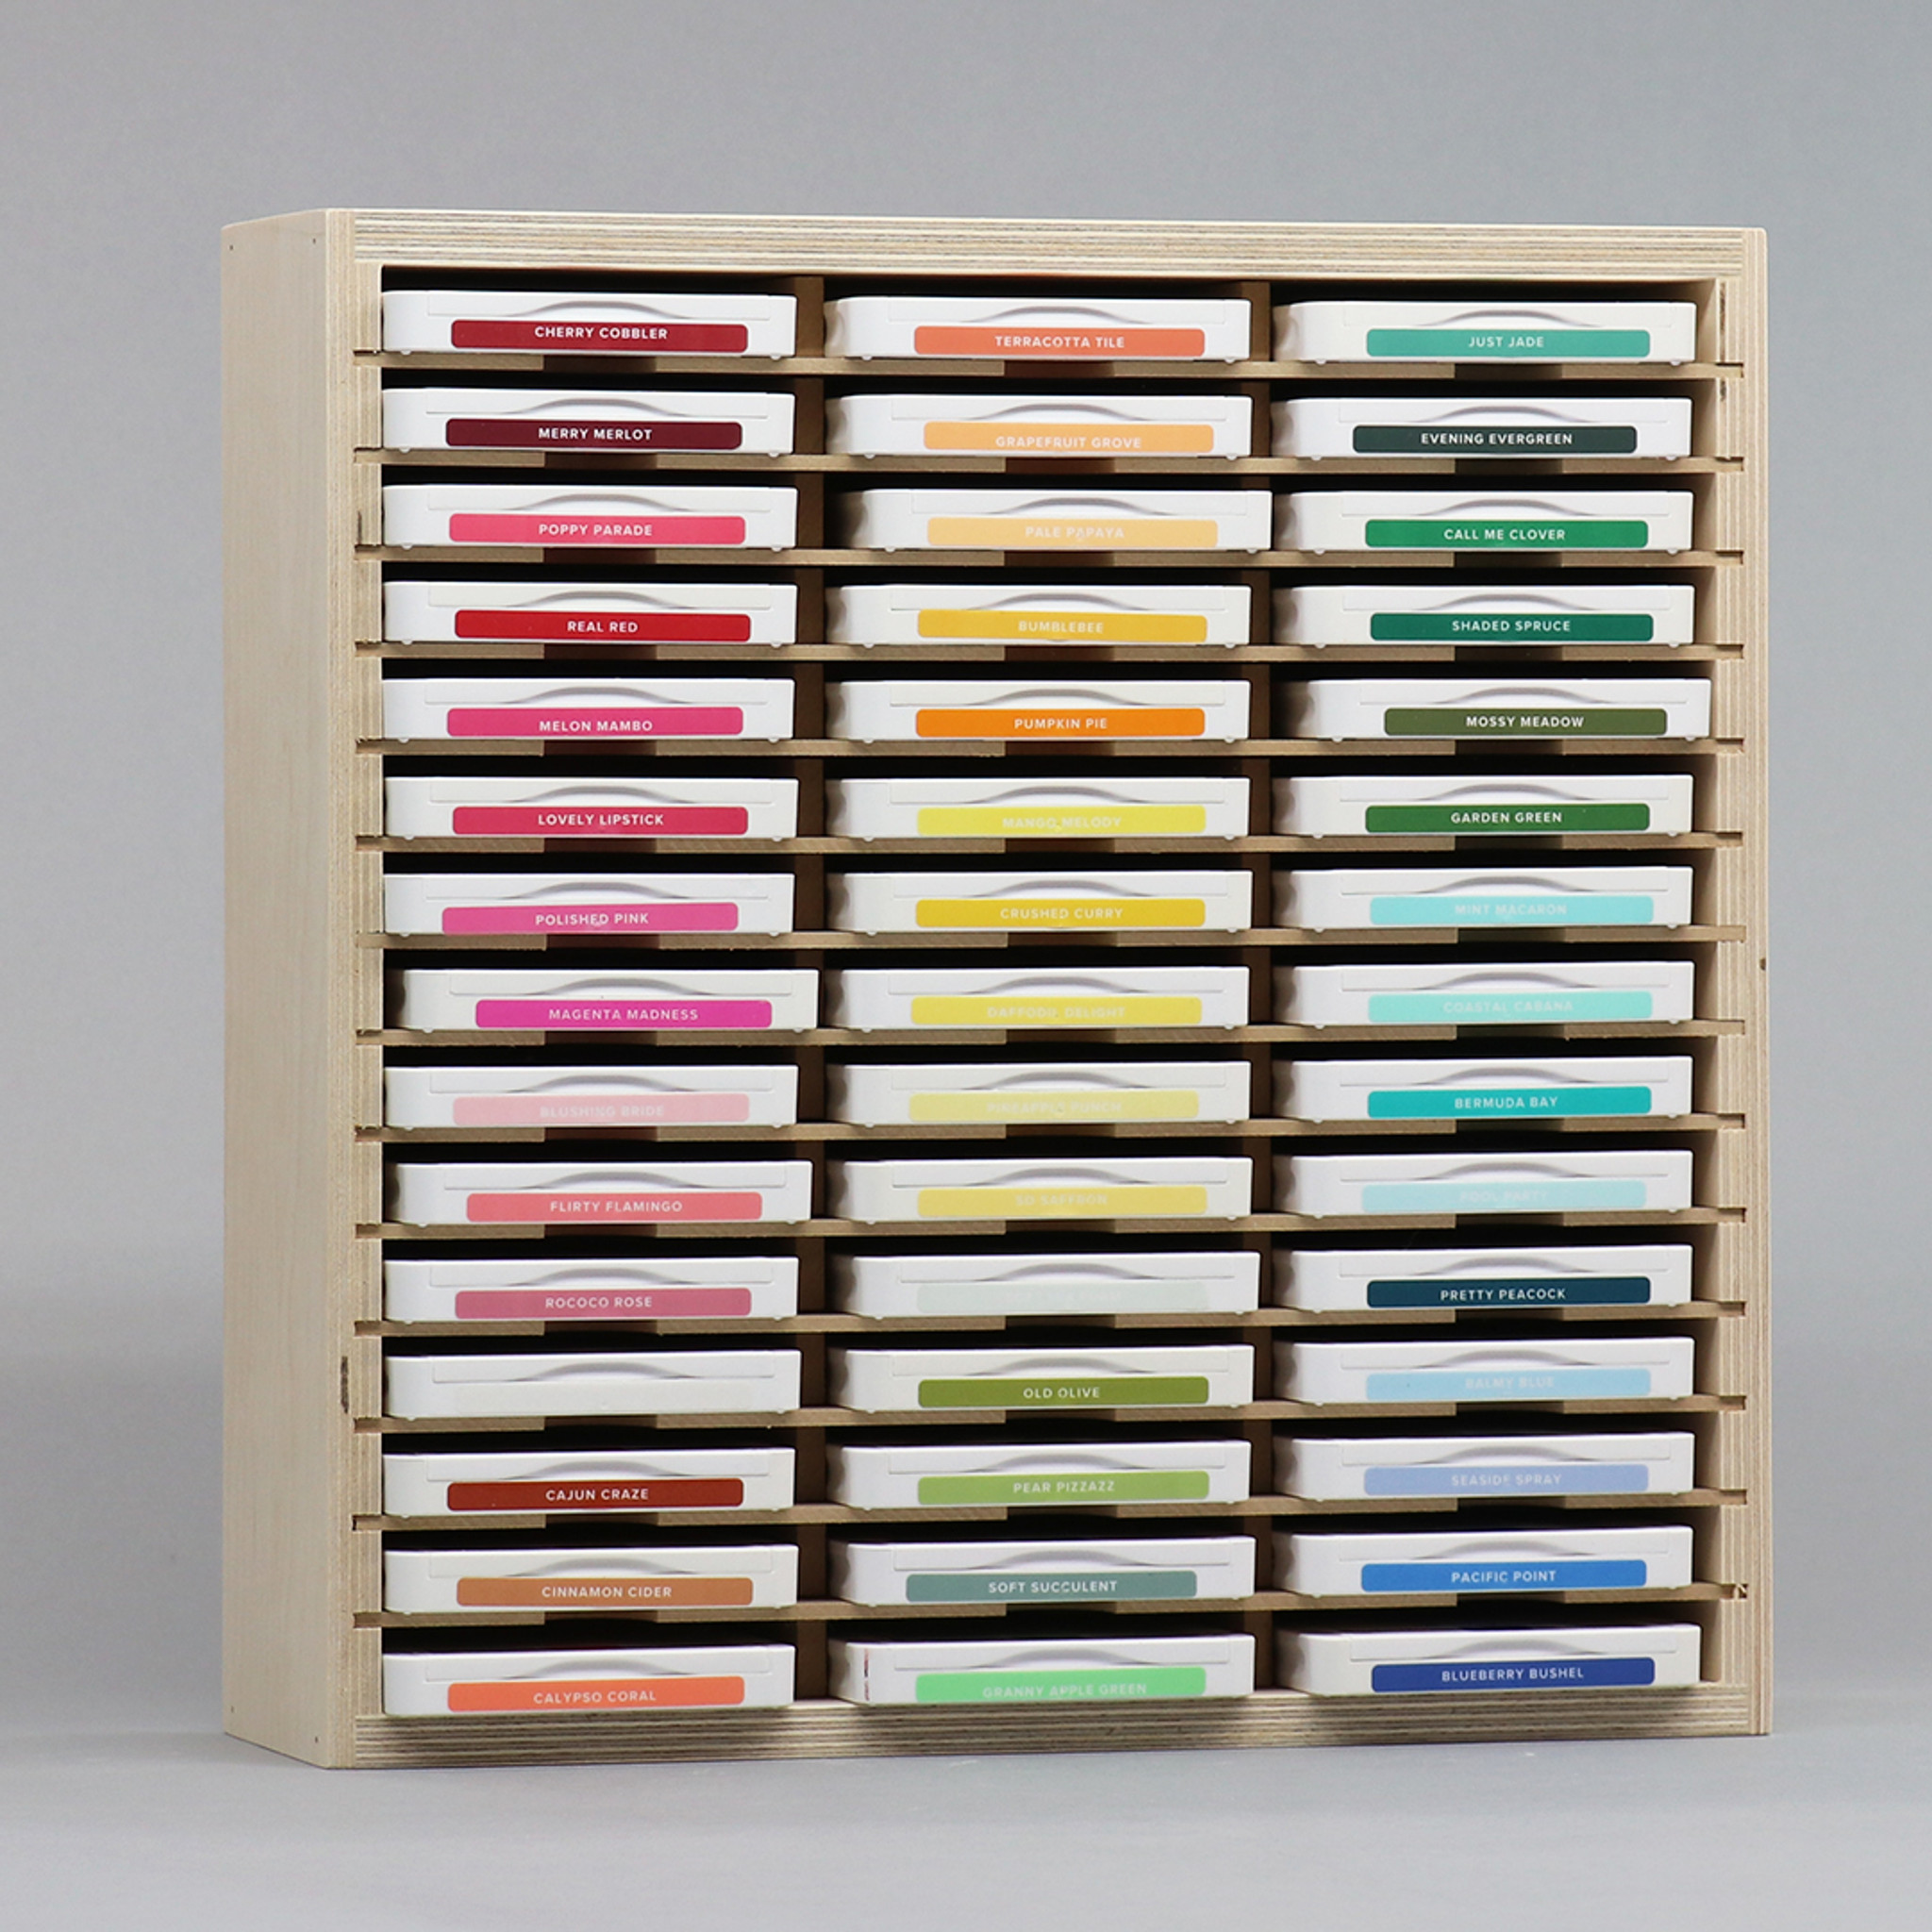 Ink Pad Storage - Stampin Up Storage For Ink Pads and Markers